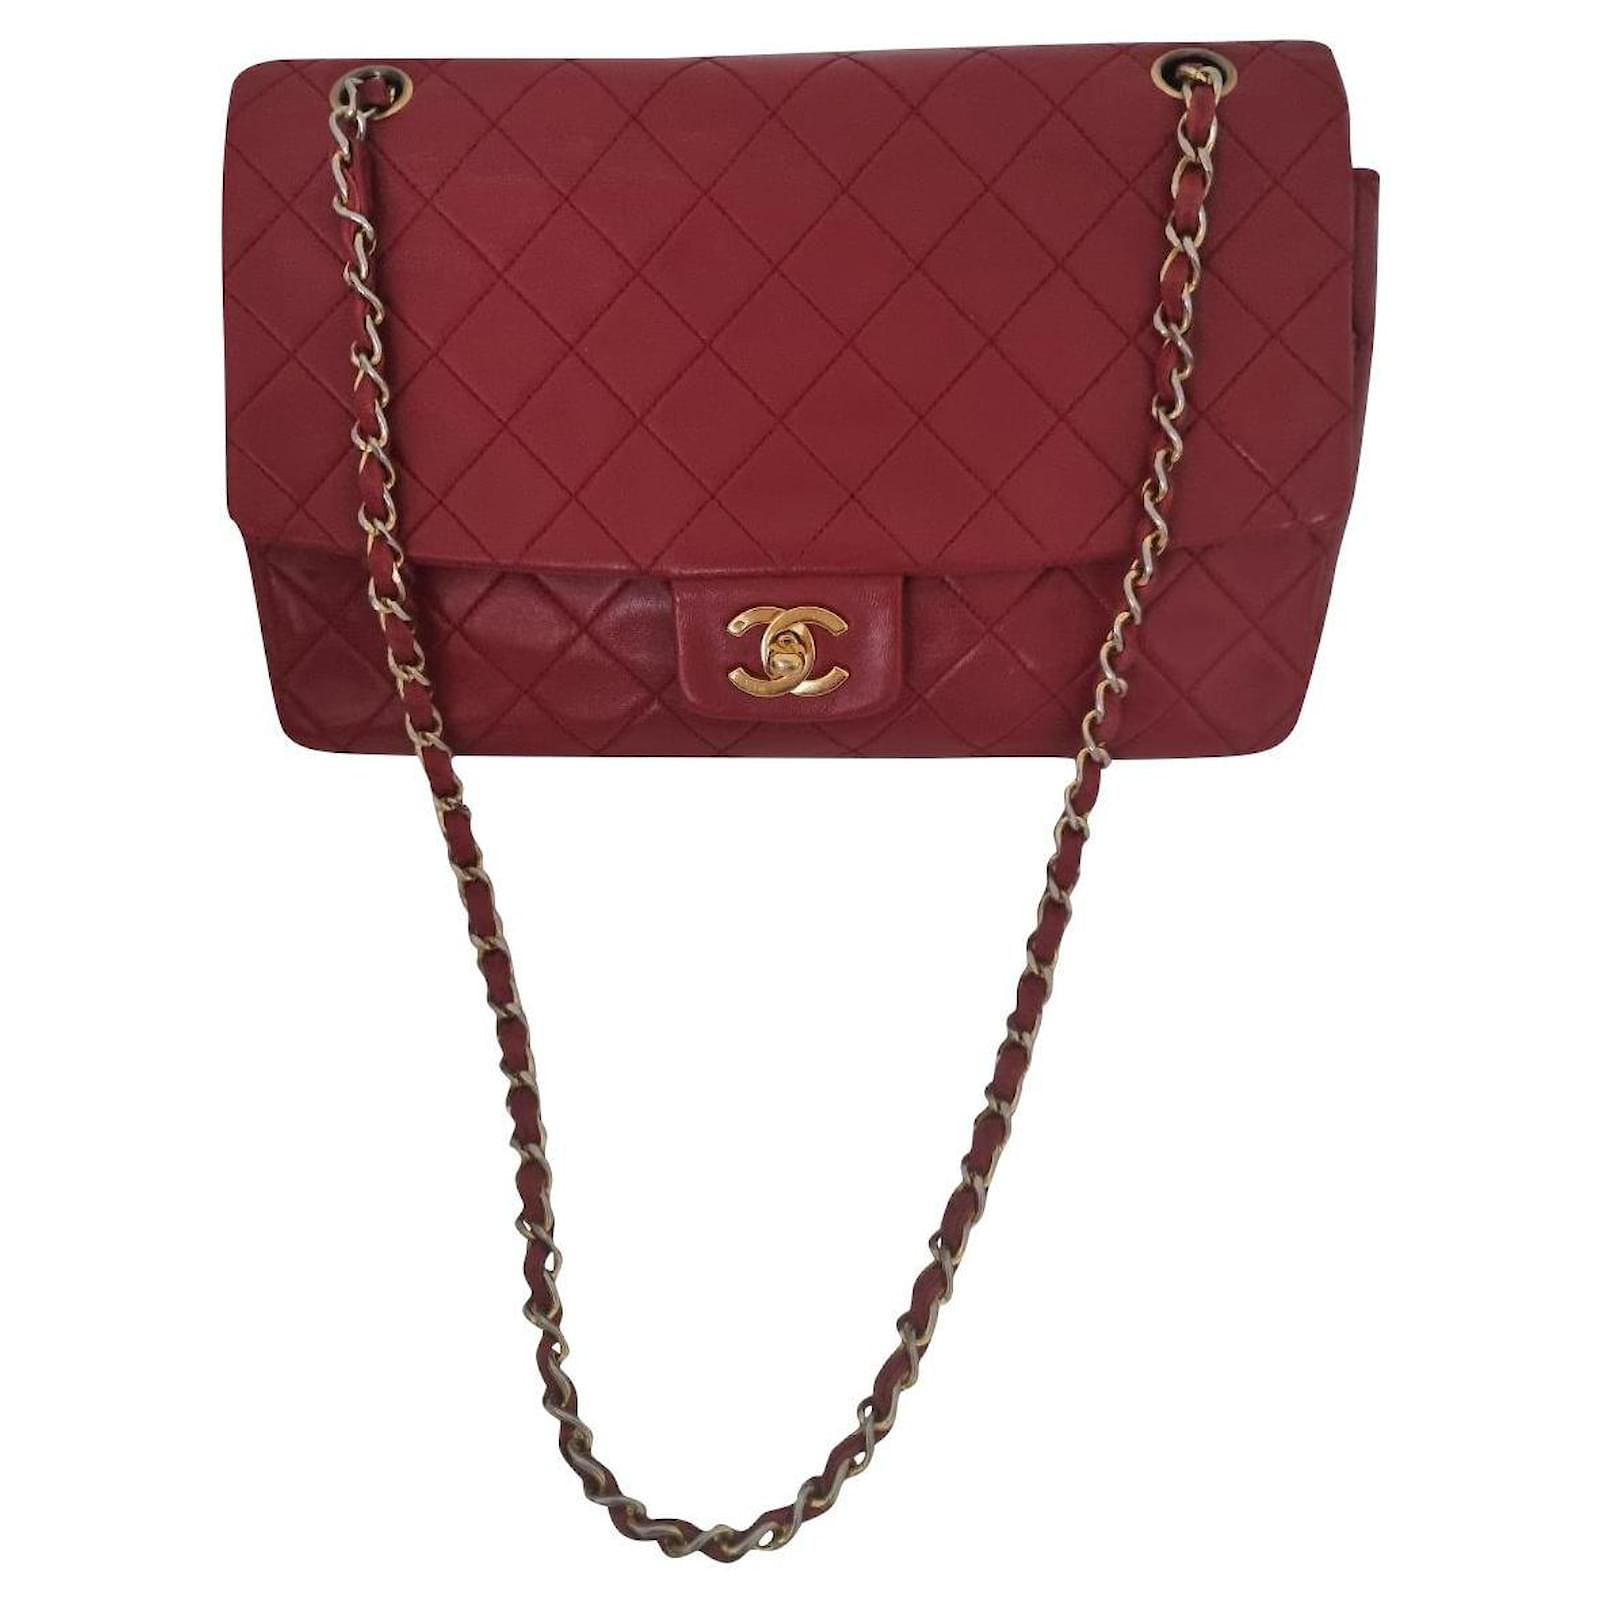 Chanel vintage red lambskin leather quilted medium lined flap bag